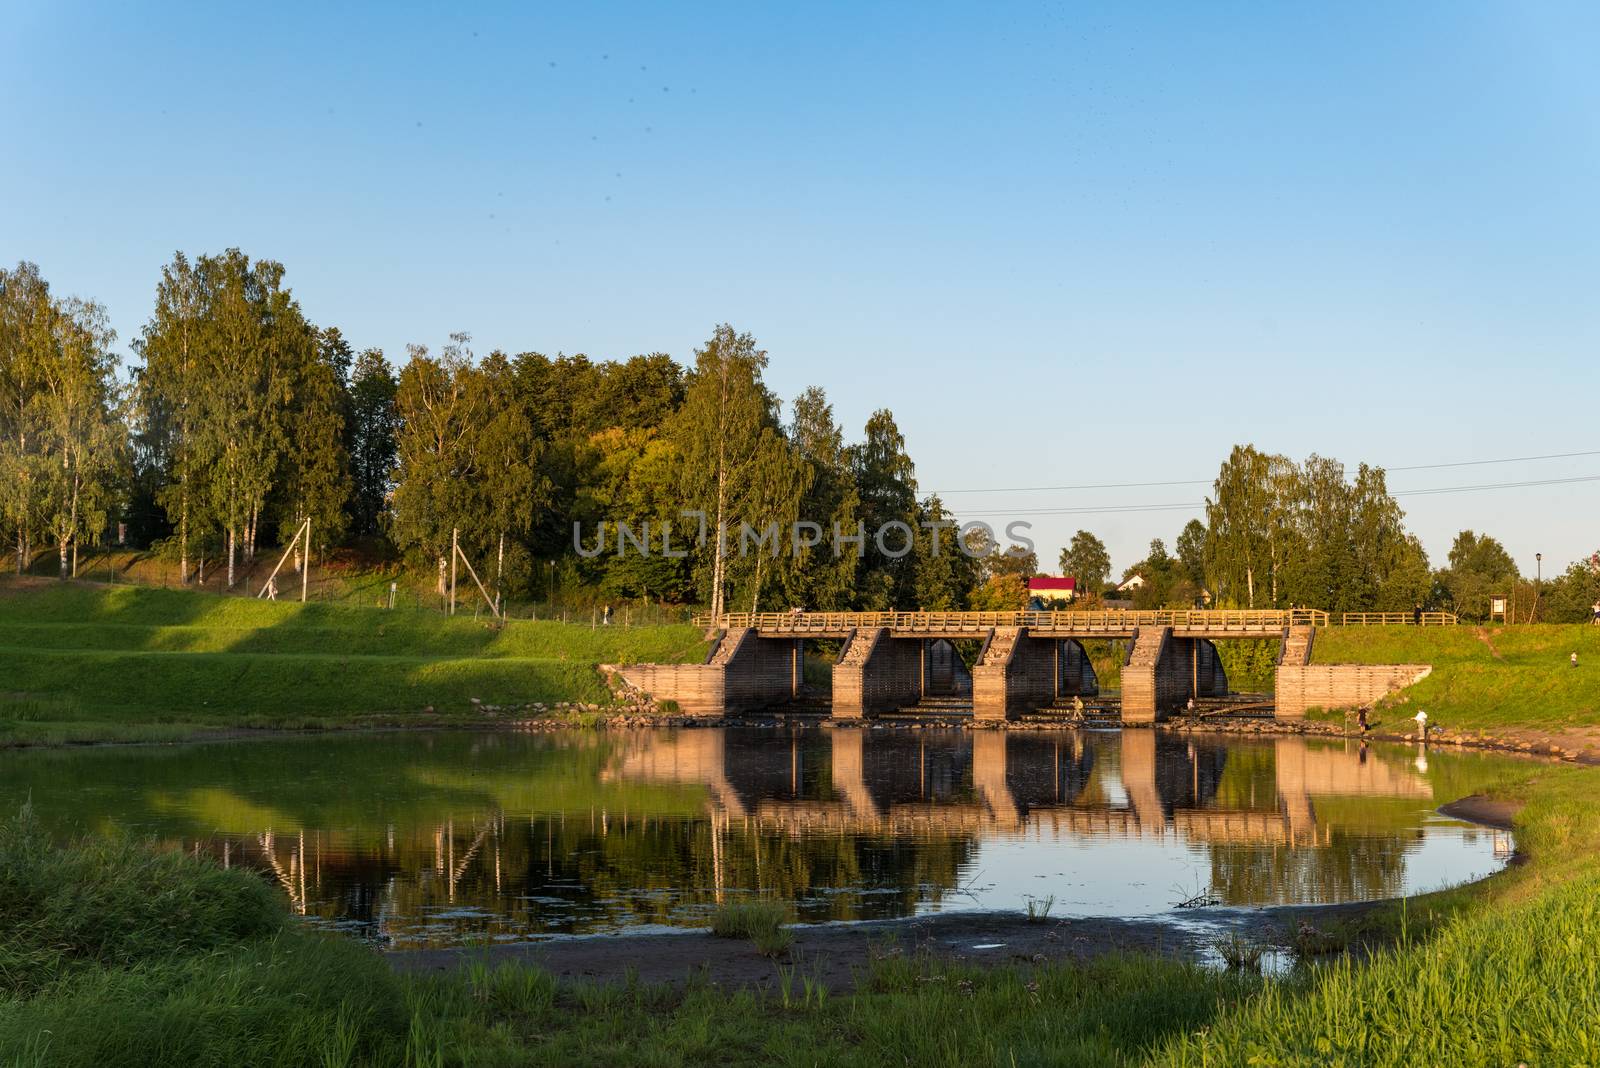 Newly restored elements of historical Tikhvin water system - wooden sluice. One of the landmark of Tikhvin, Russia